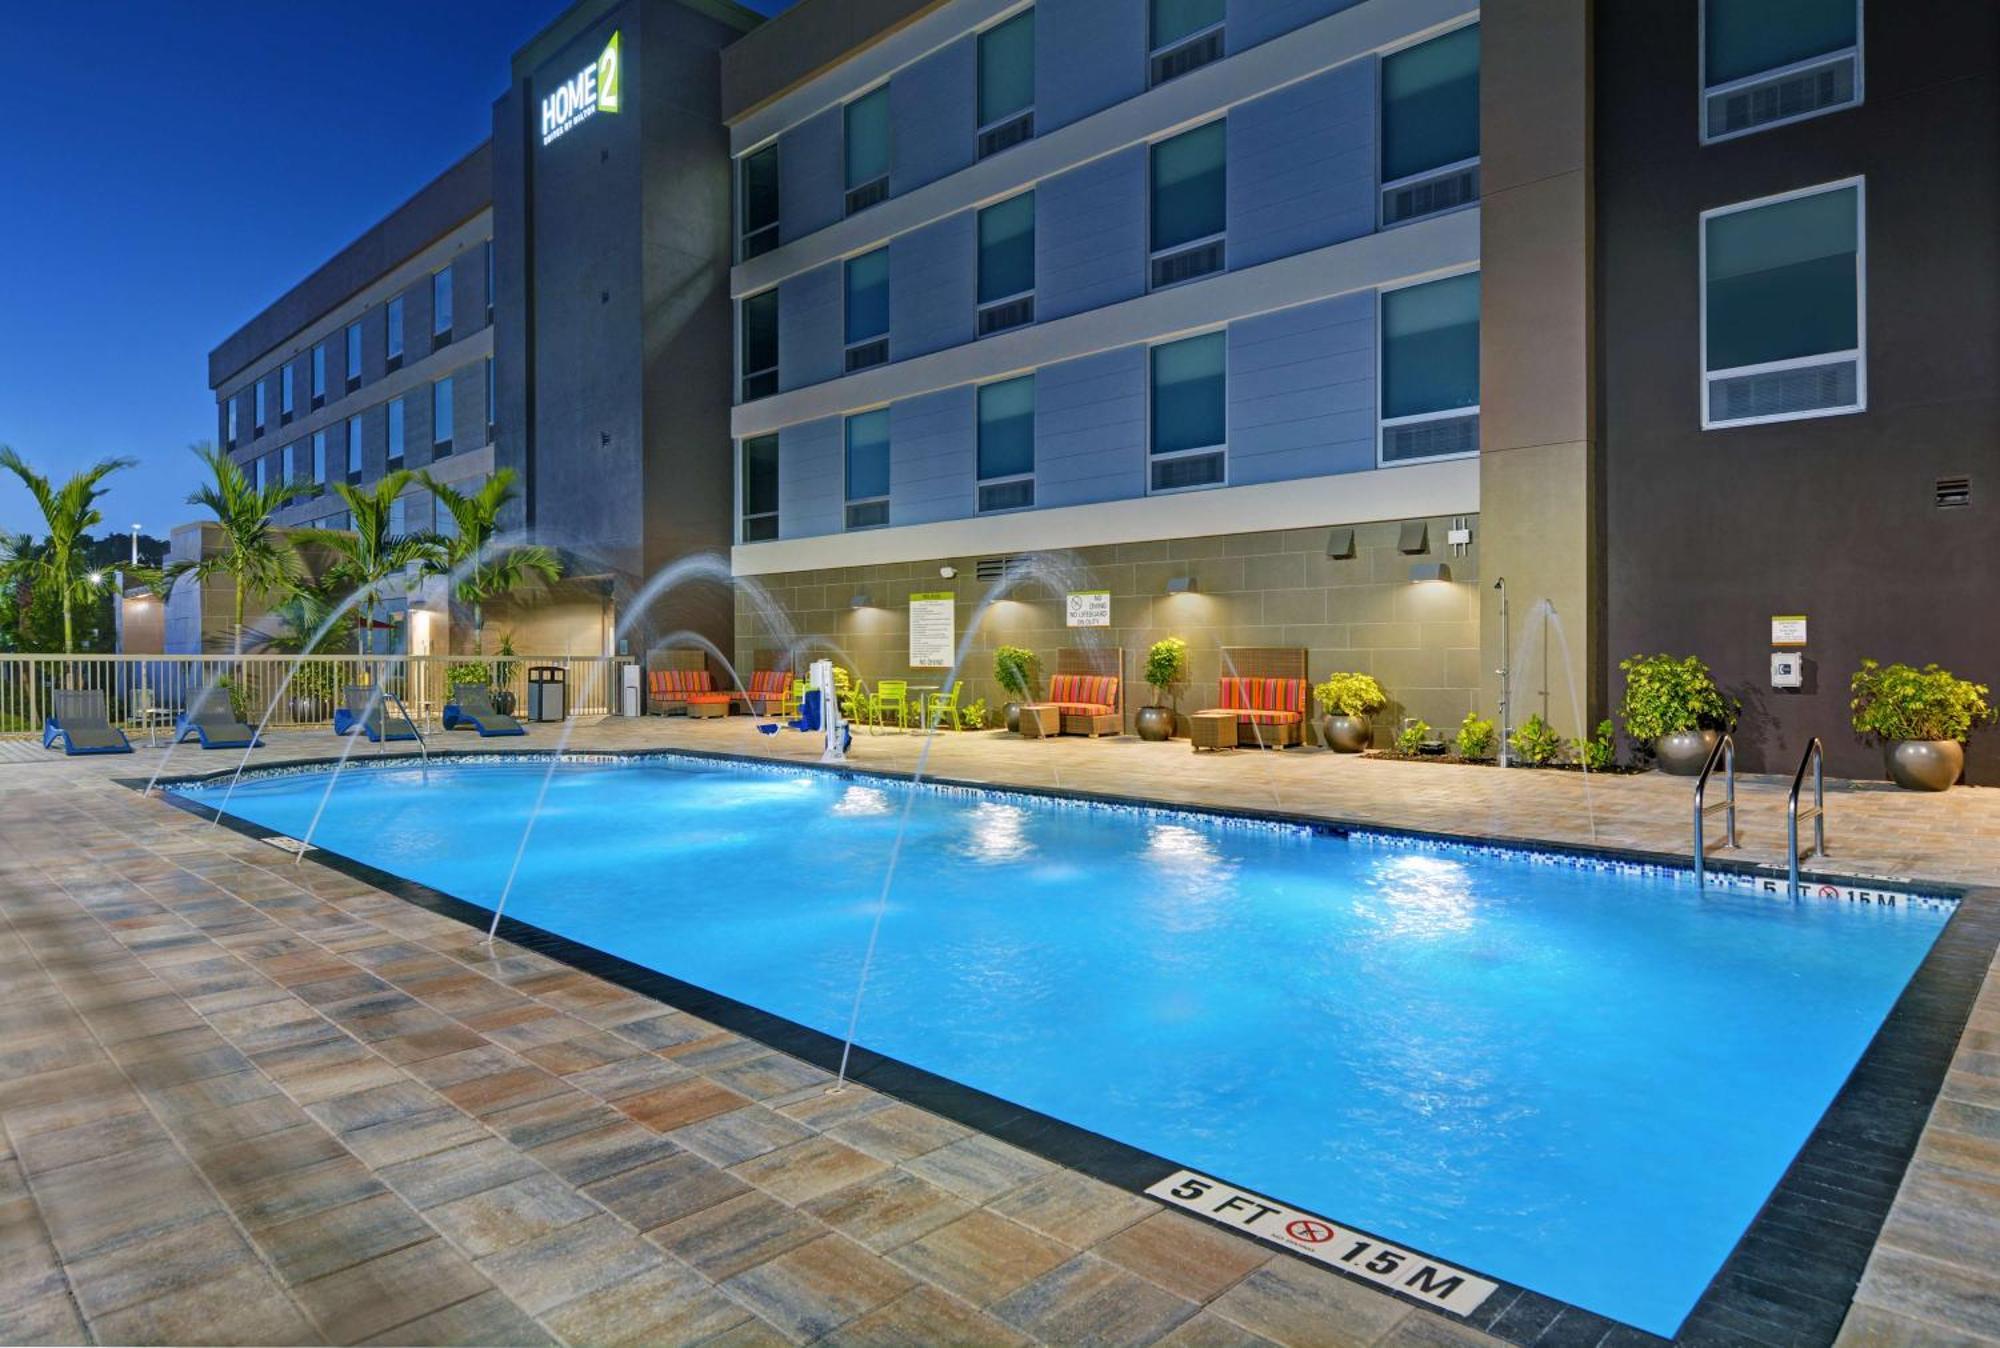 Home2 Suites By Hilton Fort Myers Colonial Blvd Buitenkant foto